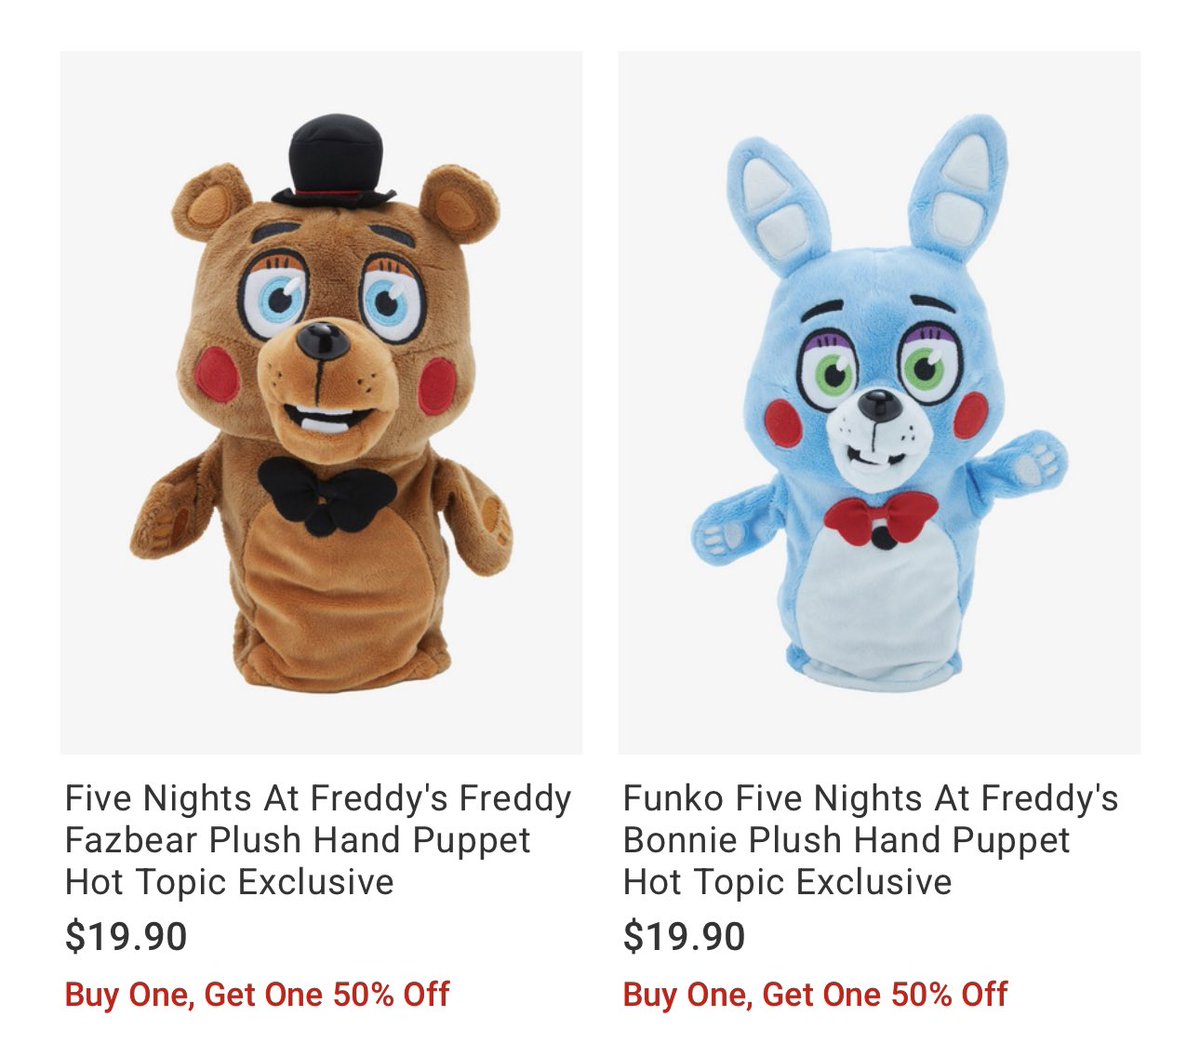 Toy Freddy and Toy Bonnie Hand Puppets are now available at Hot Topic. (Exclusive)

Toy Freddy: hottopic.com/product/five-n…
Toy Bonnie: hottopic.com/product/funko-…

Right now, if you buy one, you can get the other for half price!